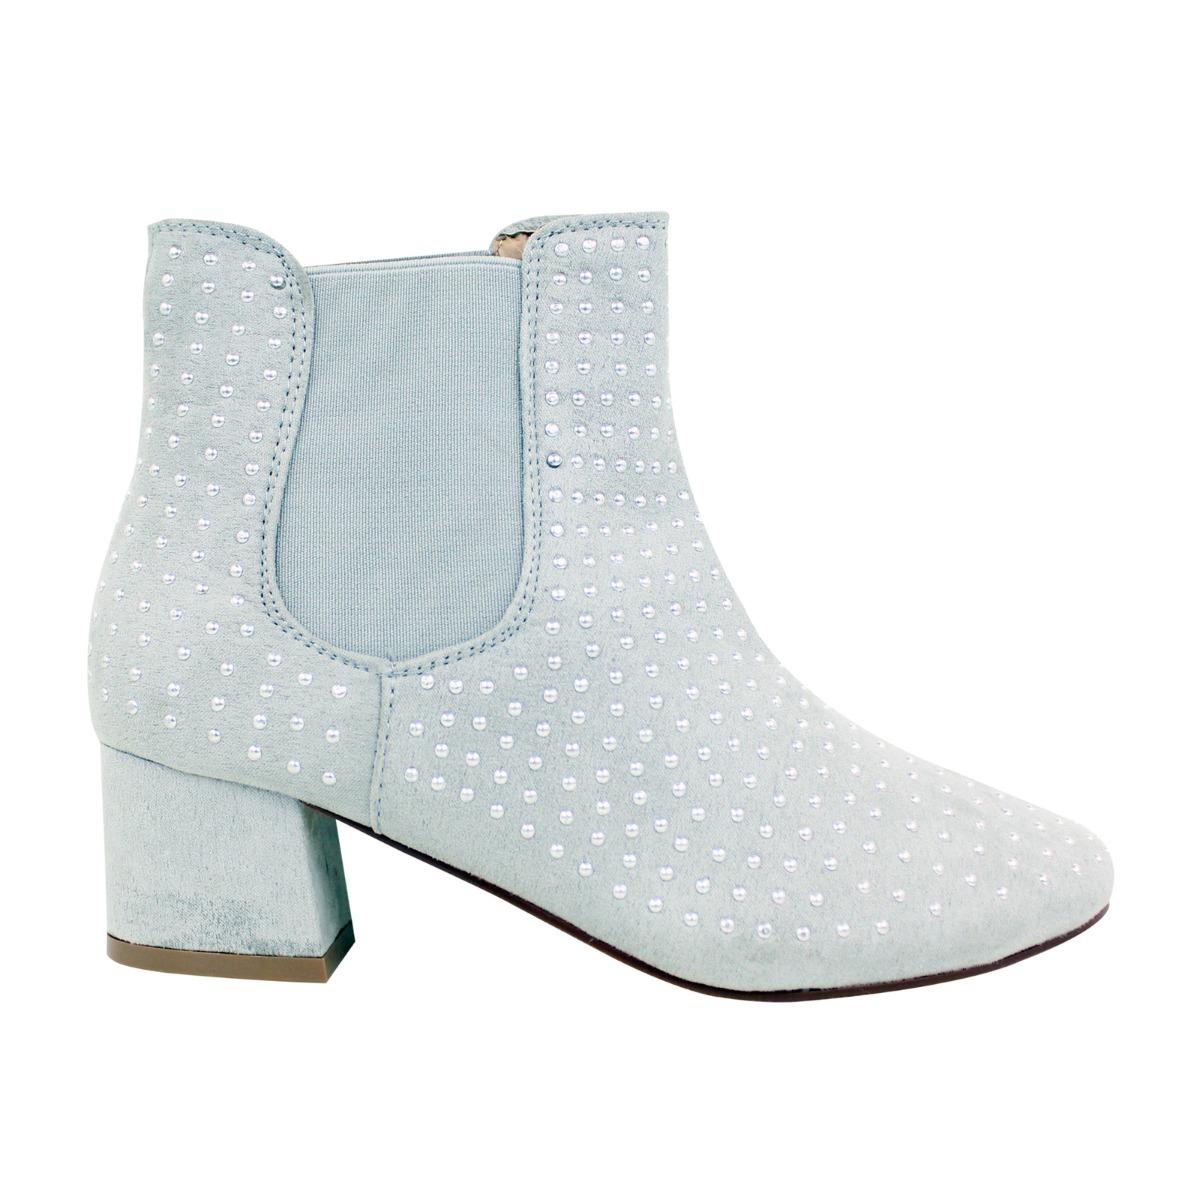 grey suede studded chelsea ankle boots